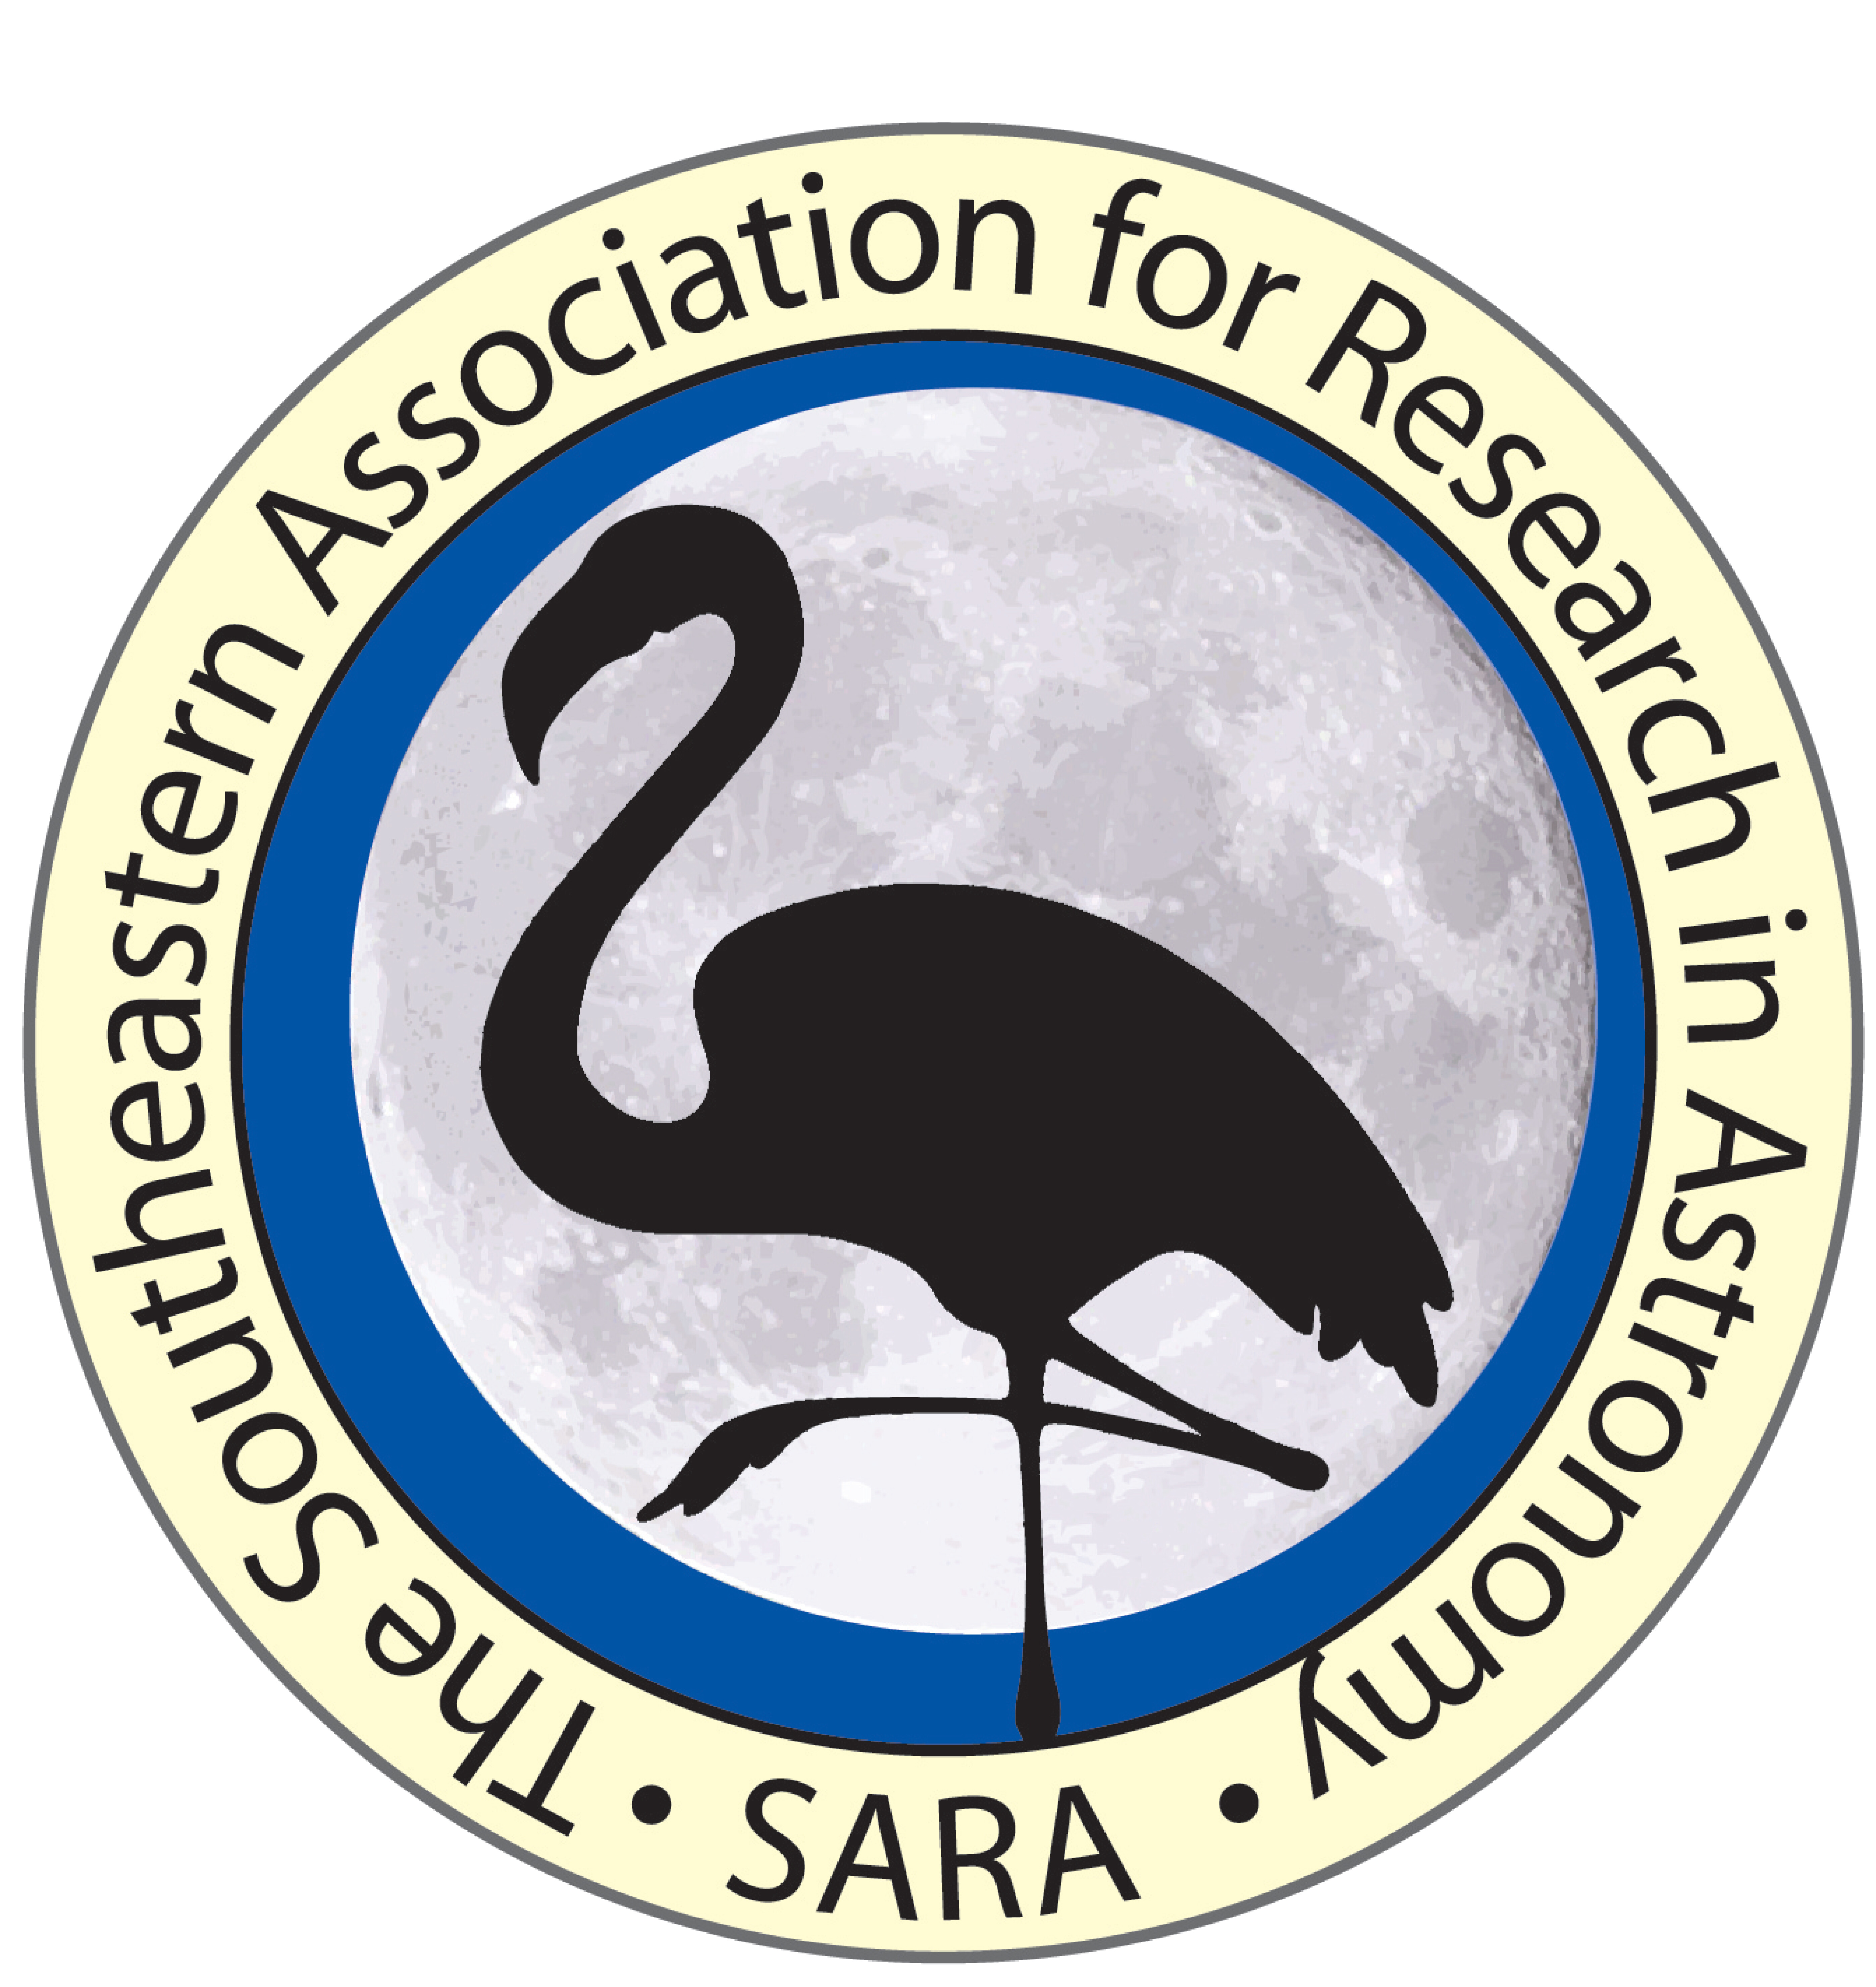 The Southeasten Association for Research in Astronomy Logo